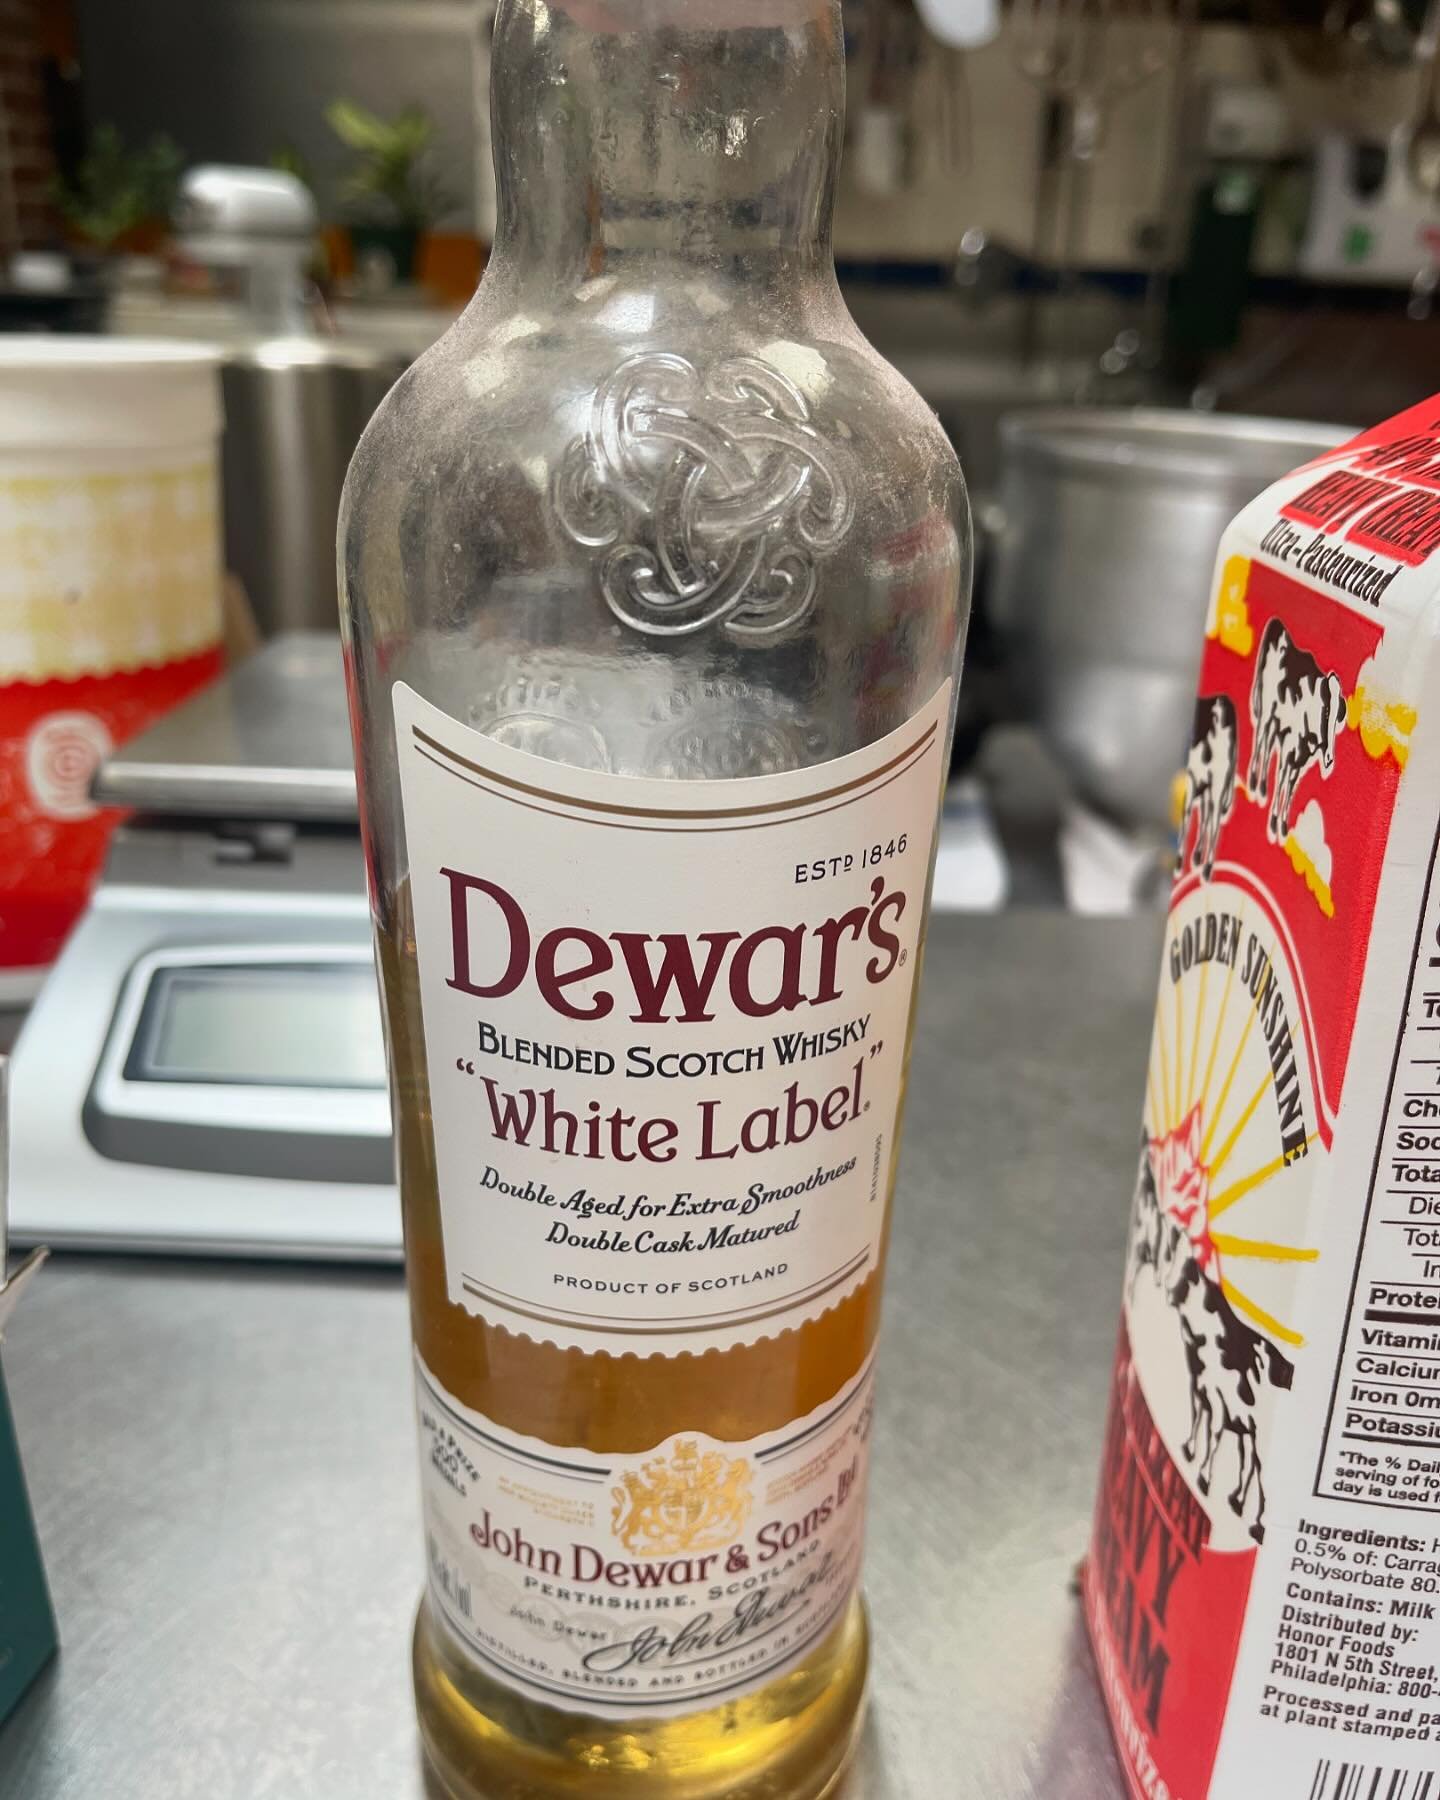 When this bottle makes an appearance it signals the return of many of our customers favorite Mass Holes&hellip; The Davolls.

Davoll&rsquo;s Butter Pecan Bliss
Named for America&rsquo;s oldest general store in South Dartmouth, MA, @davollsgeneralstor